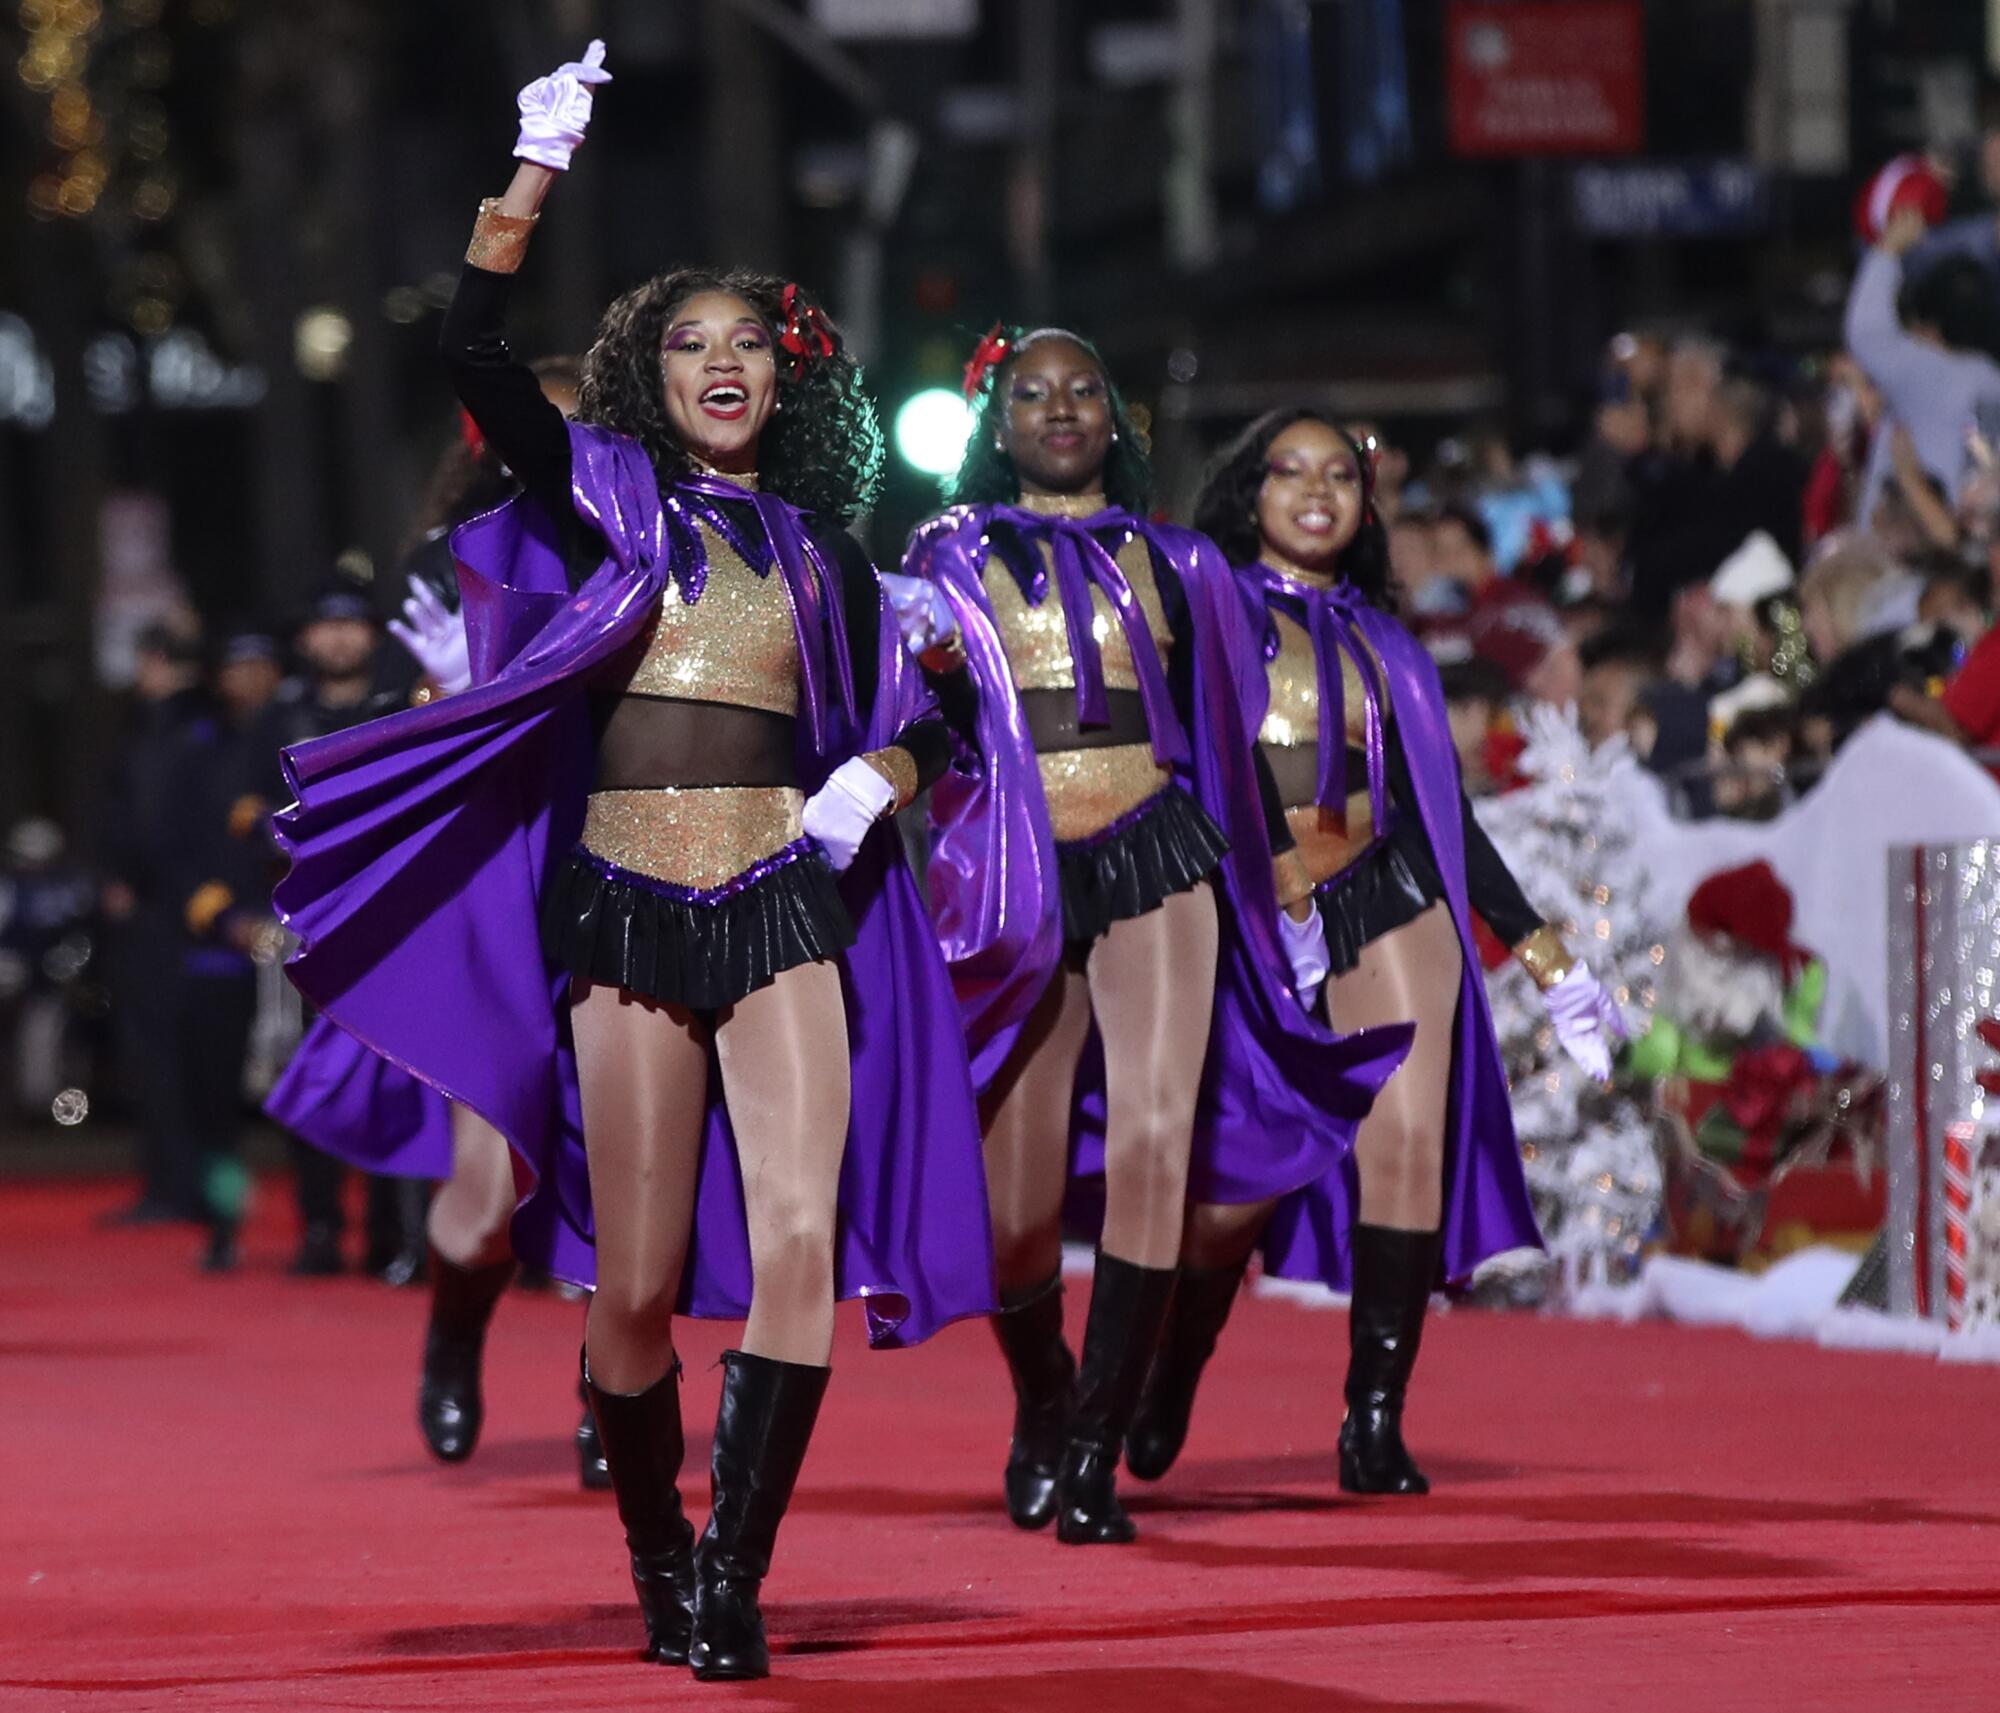 Women in purple, gold and black costumes perform on the red carpet.